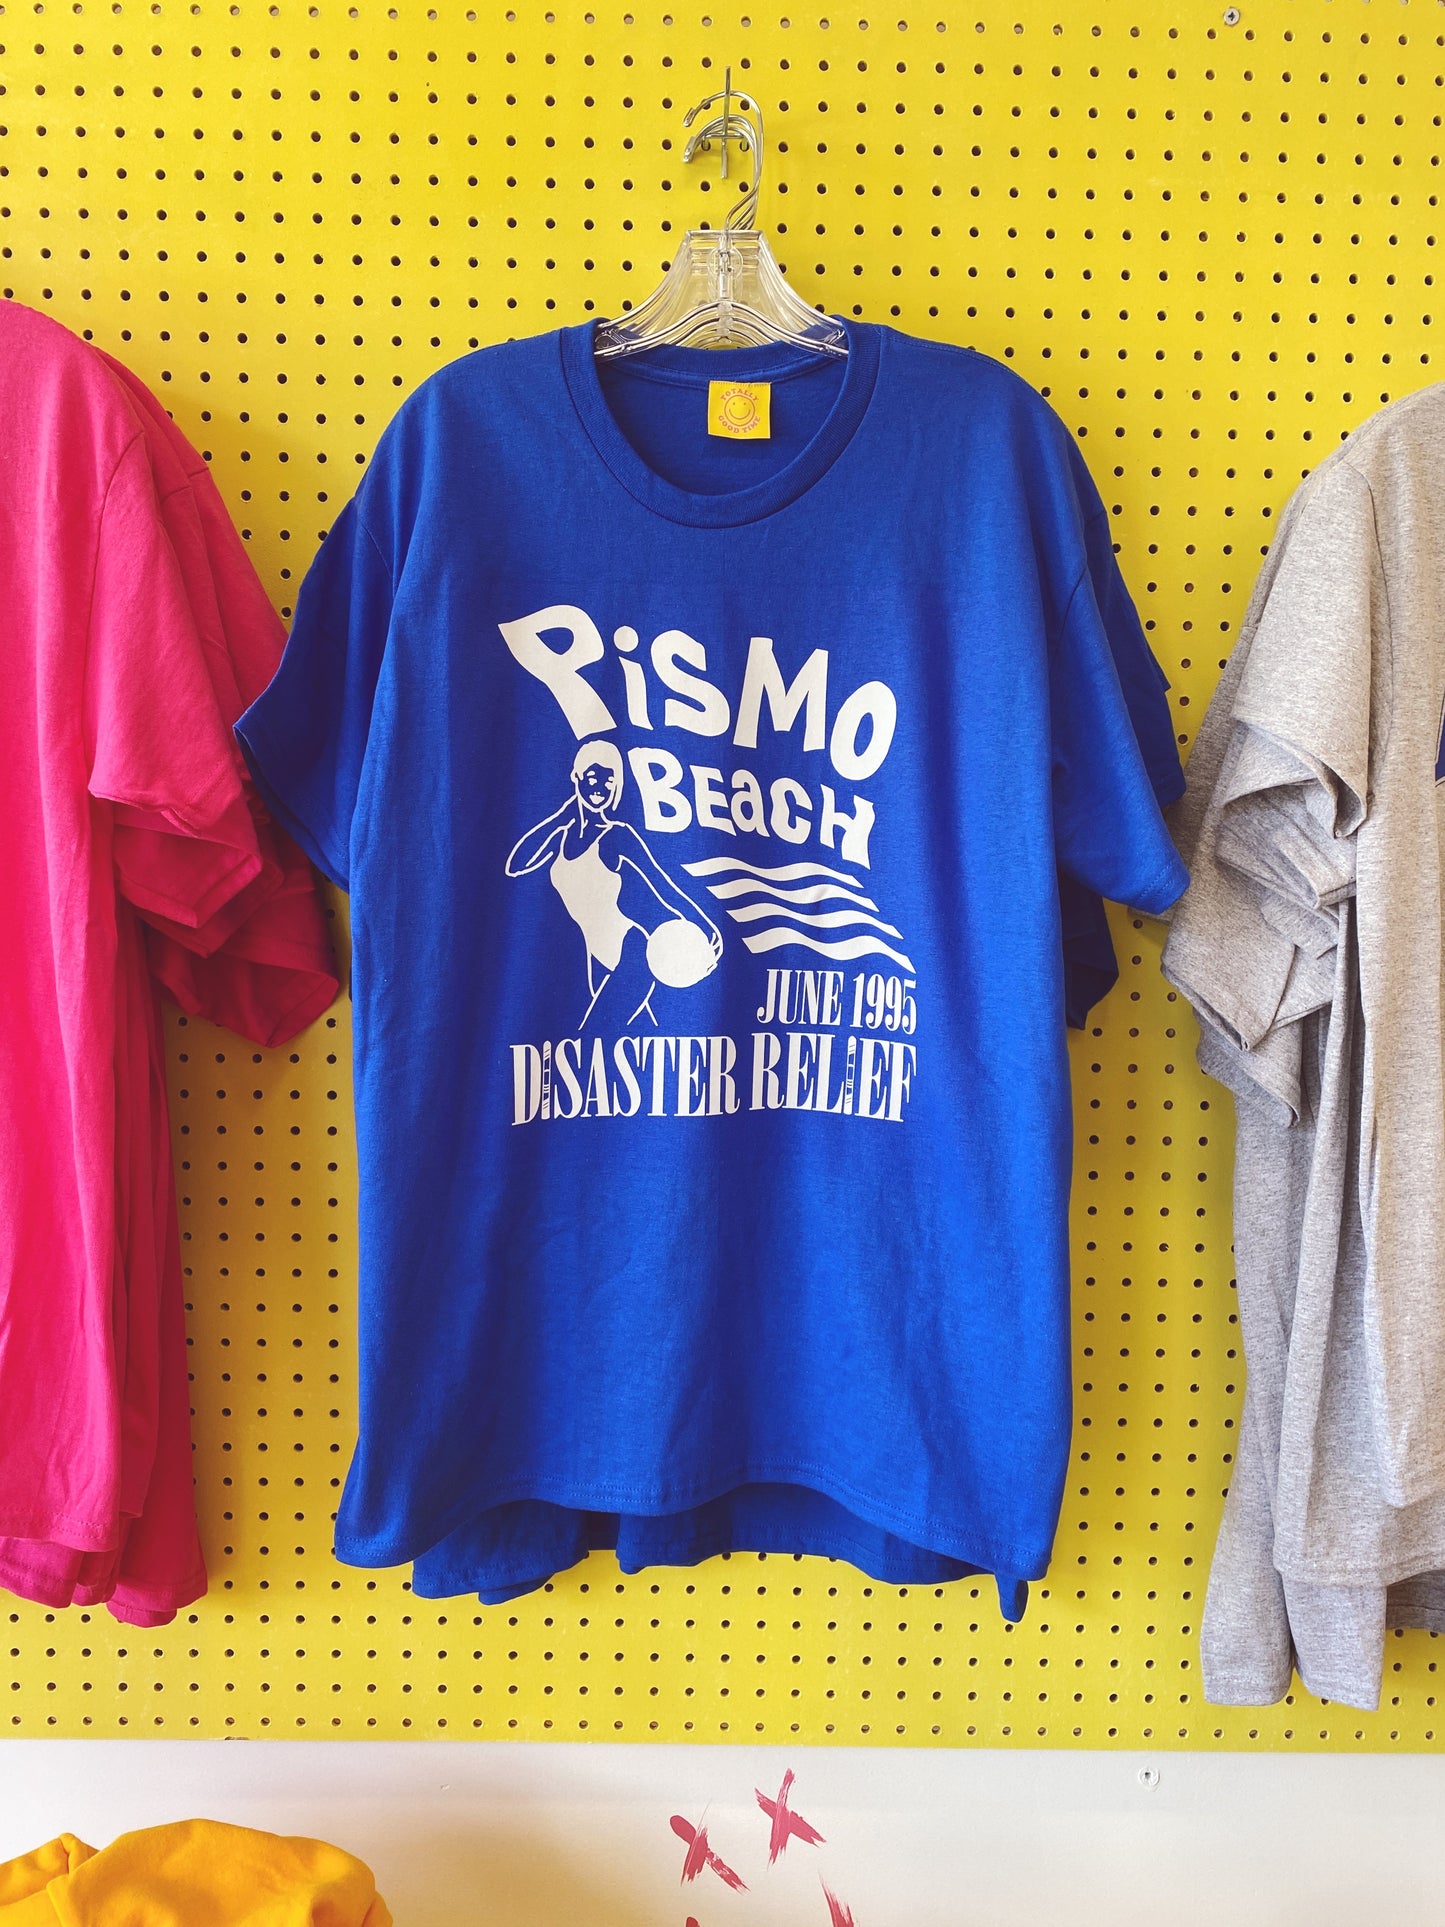 Clueless Pismo Beach Disaster Relief tee